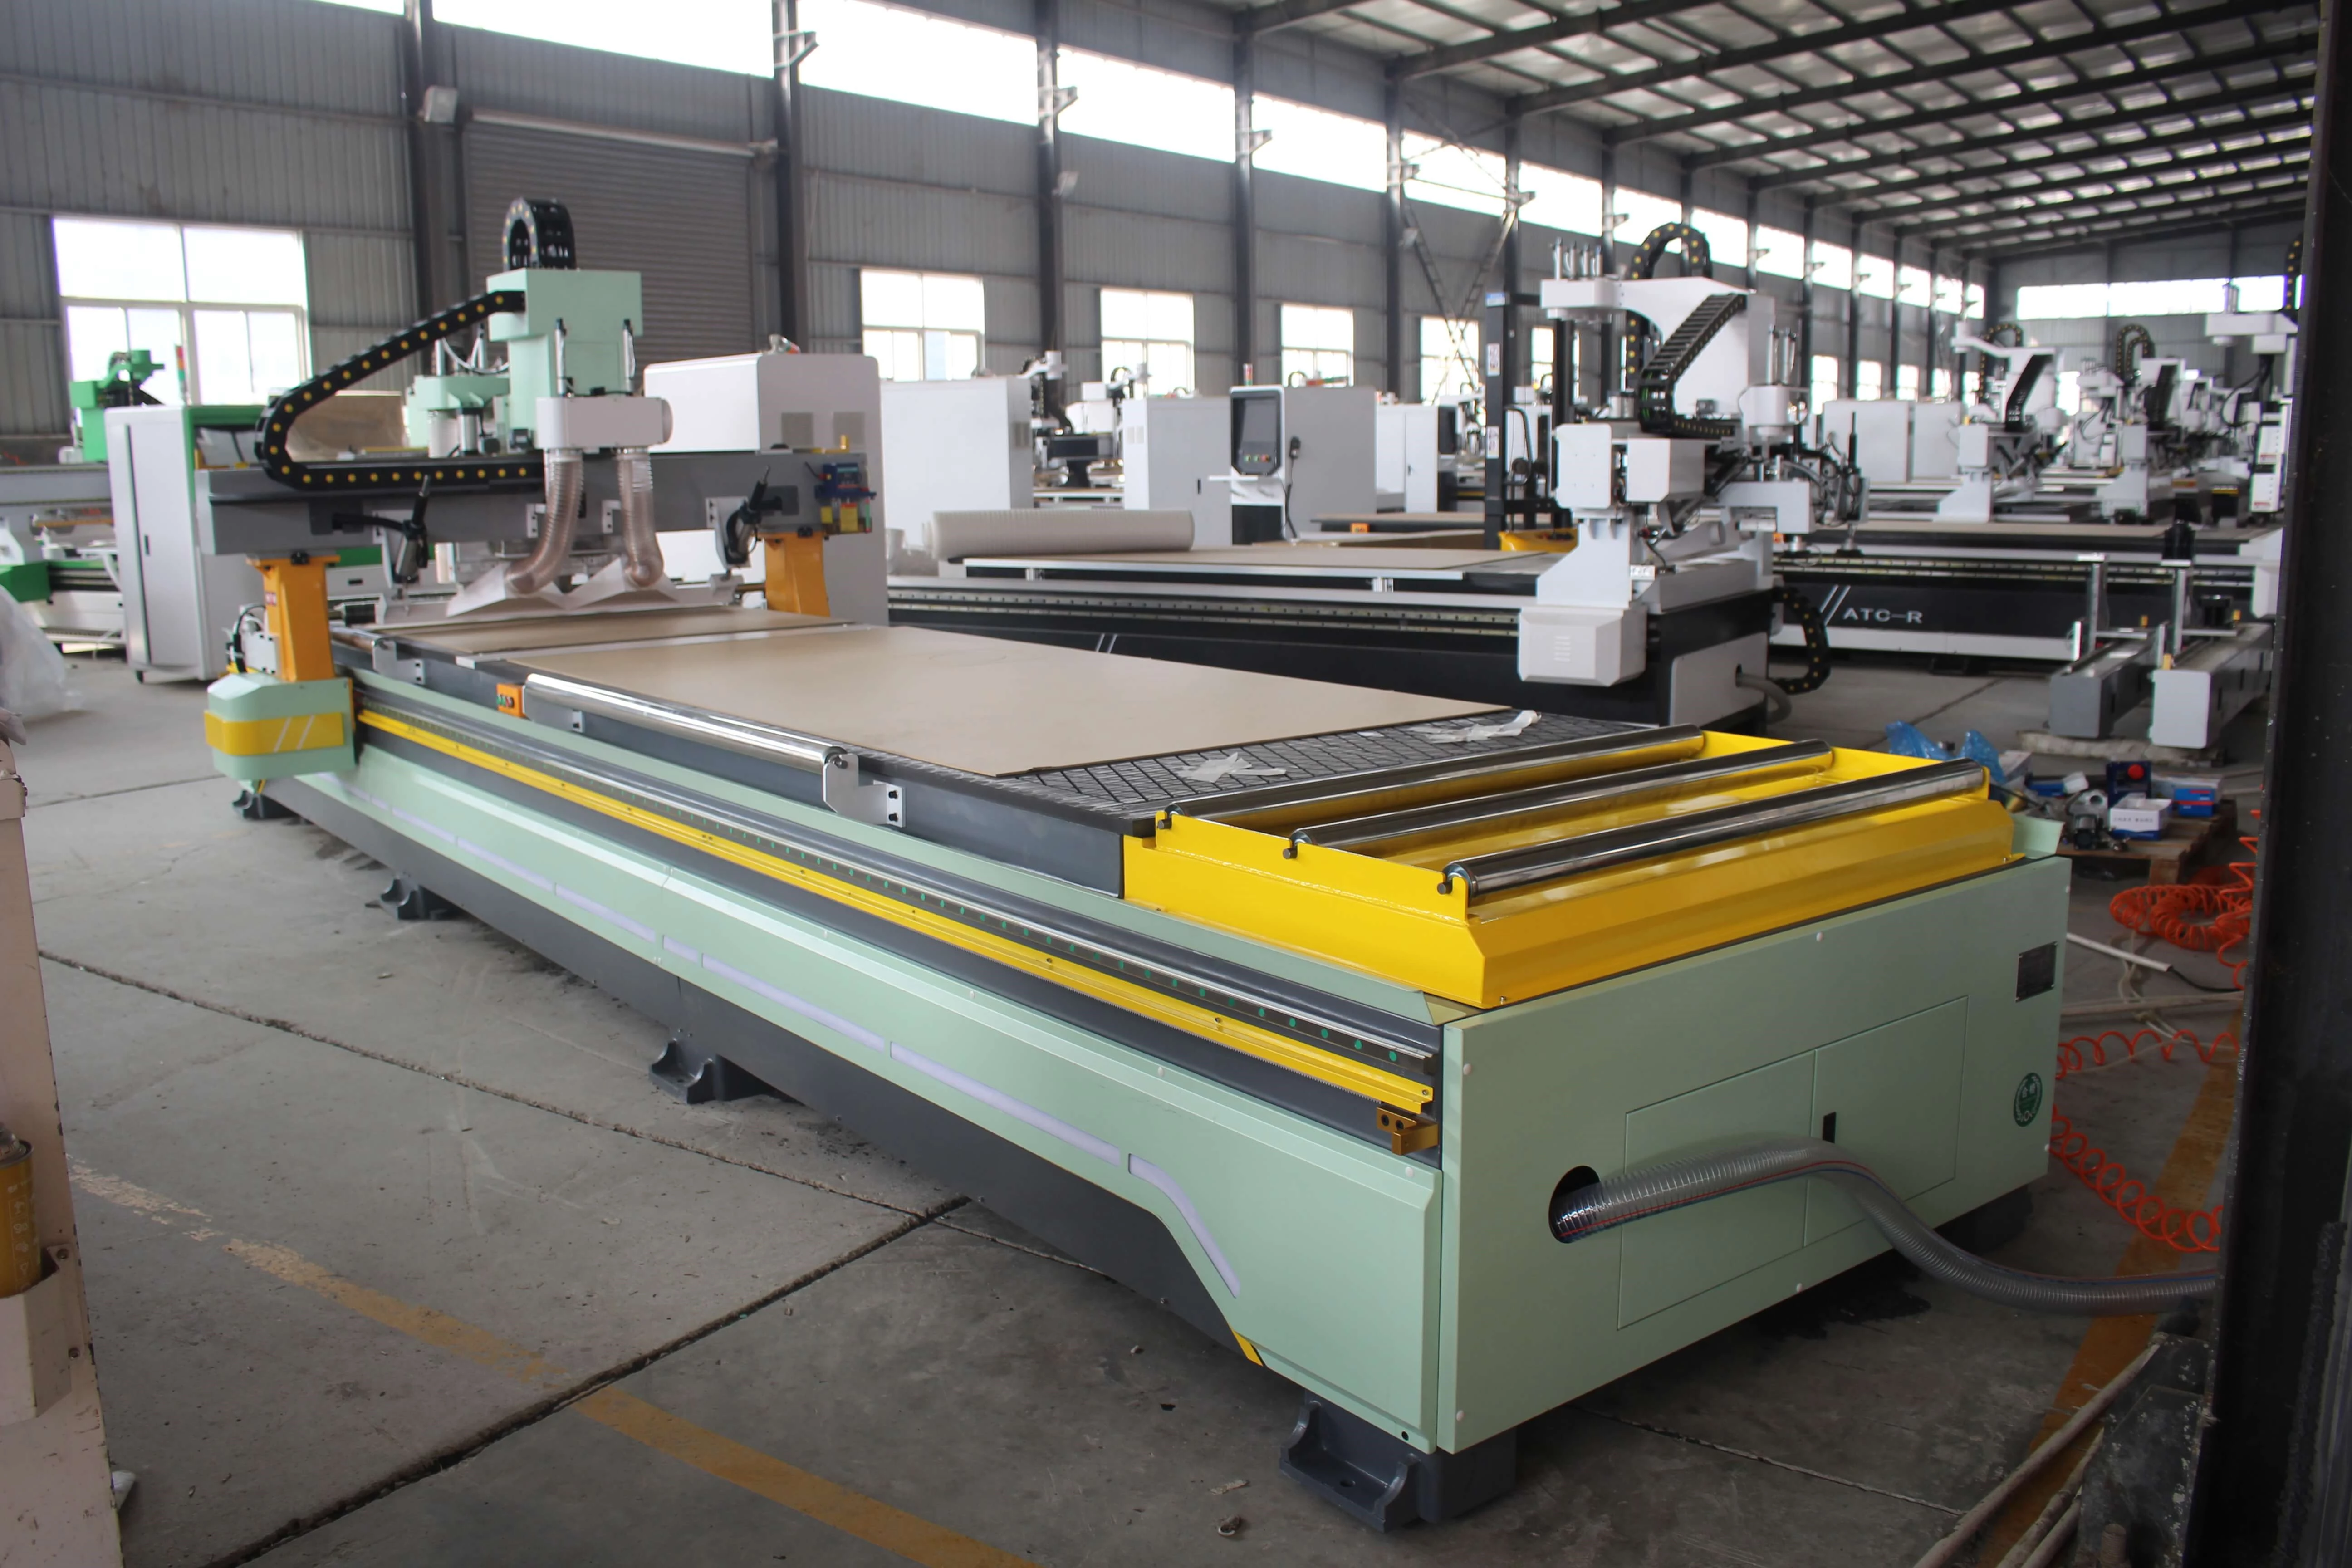 atc cnc router wood engraving machine  wood door making linear atc cnc router machine for sale